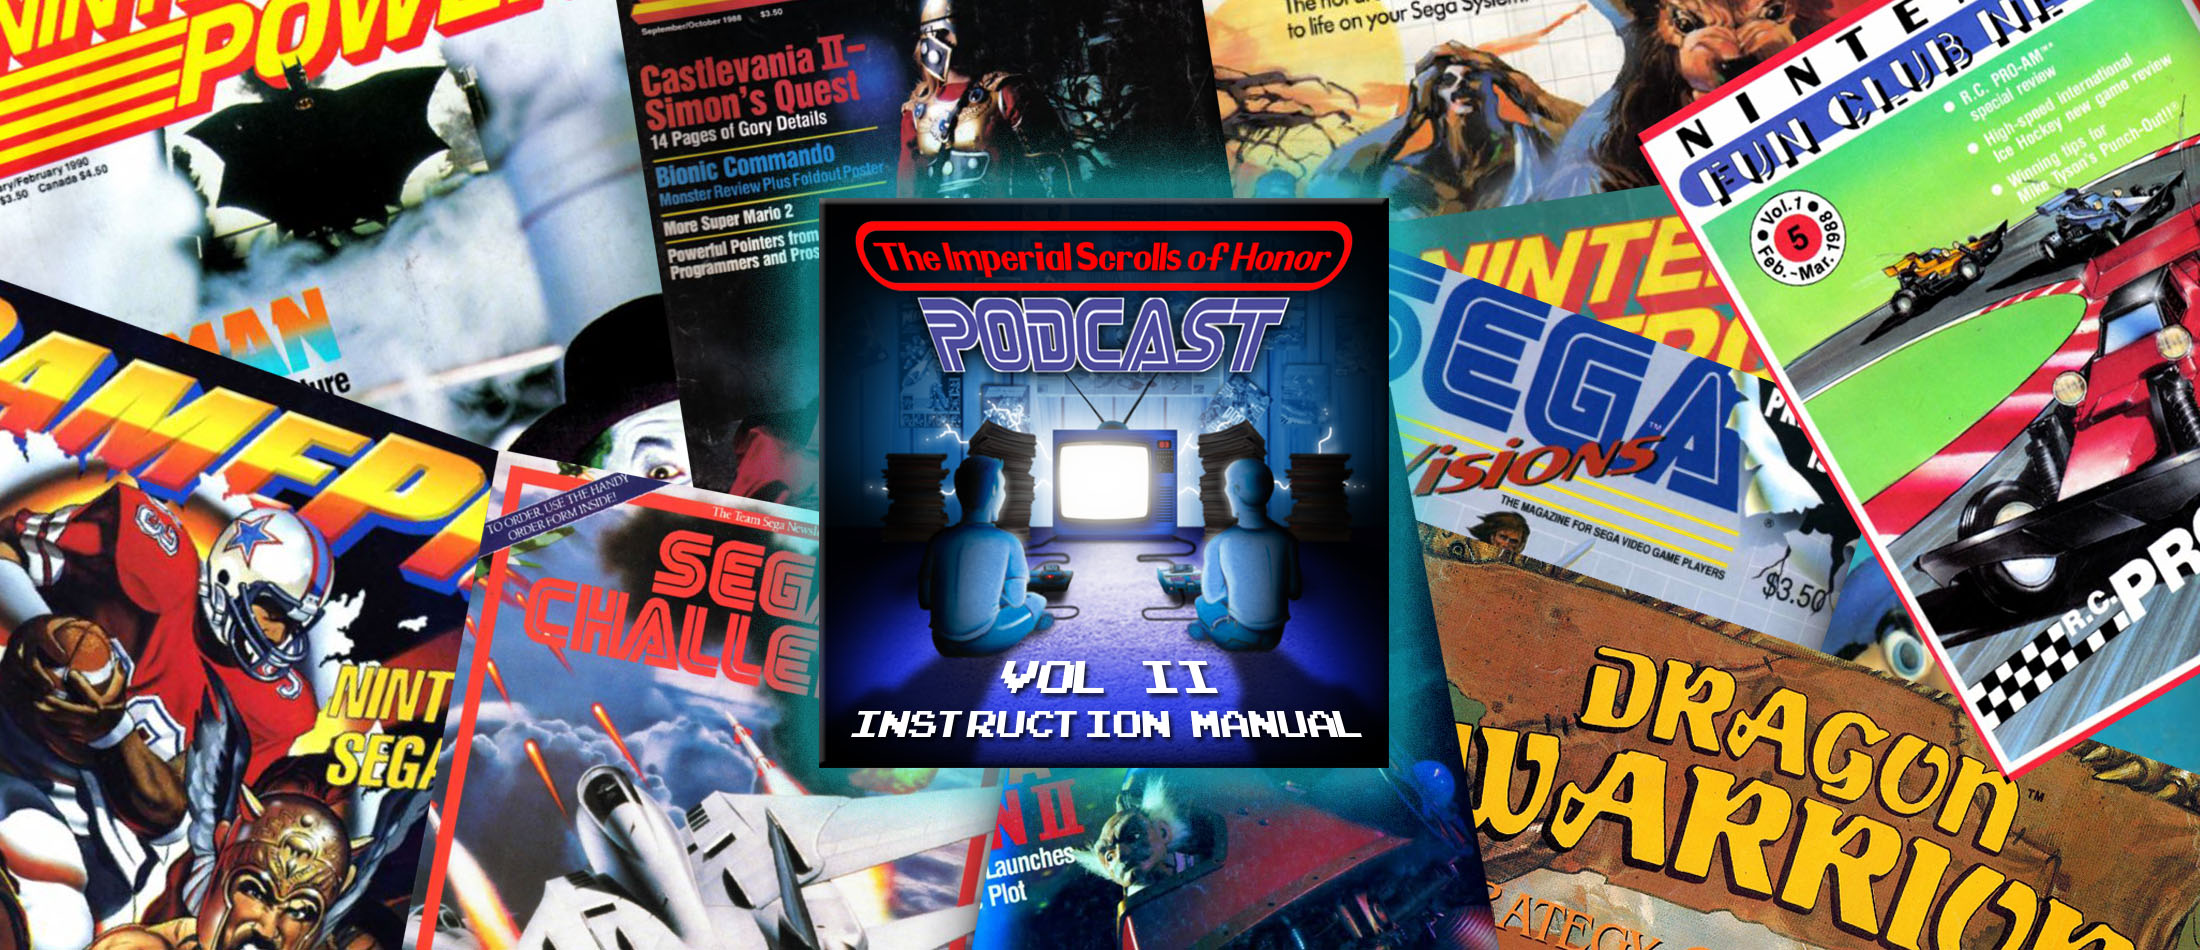 Imperial Scrolls of Honor Podcast - Instruction Manual Vol. II